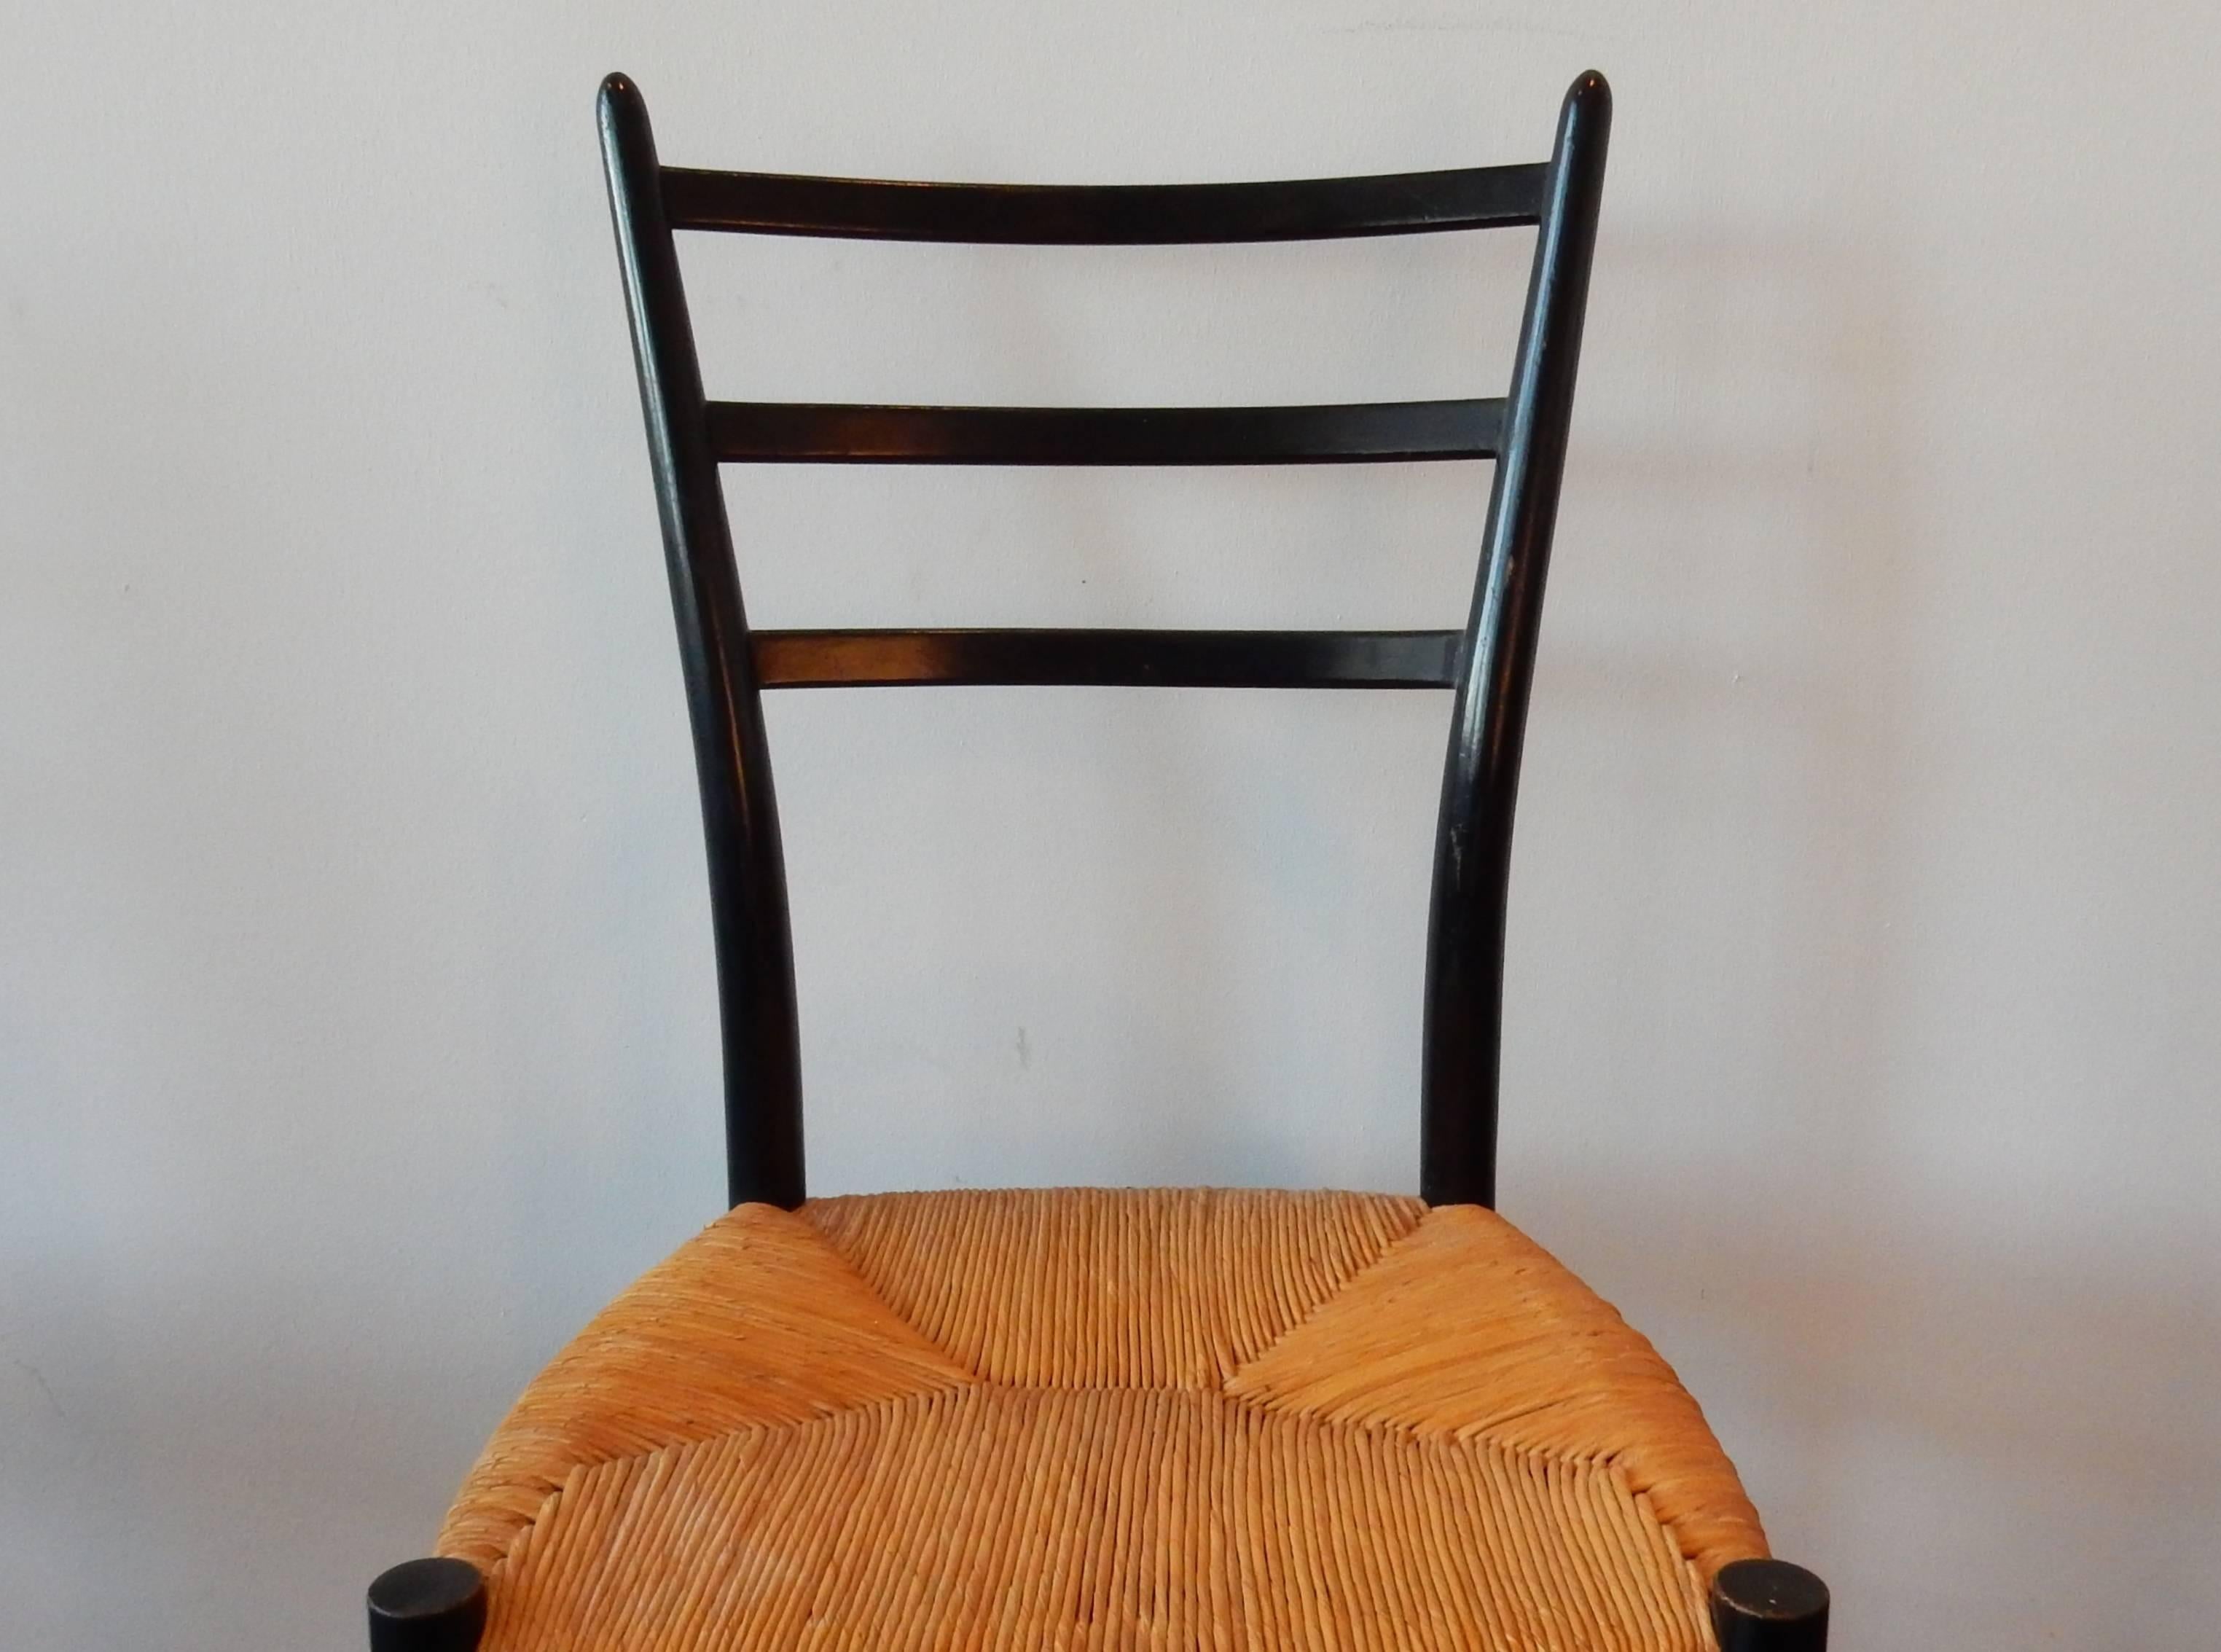 This is a fantastic set of five 'Spinetto' dining chairs by Italian manufacturer Chiavari. The ebonized wooden frames are in very good condition with some signs of age. All come with their floor rubbers. The wicker seats are in a very good condition